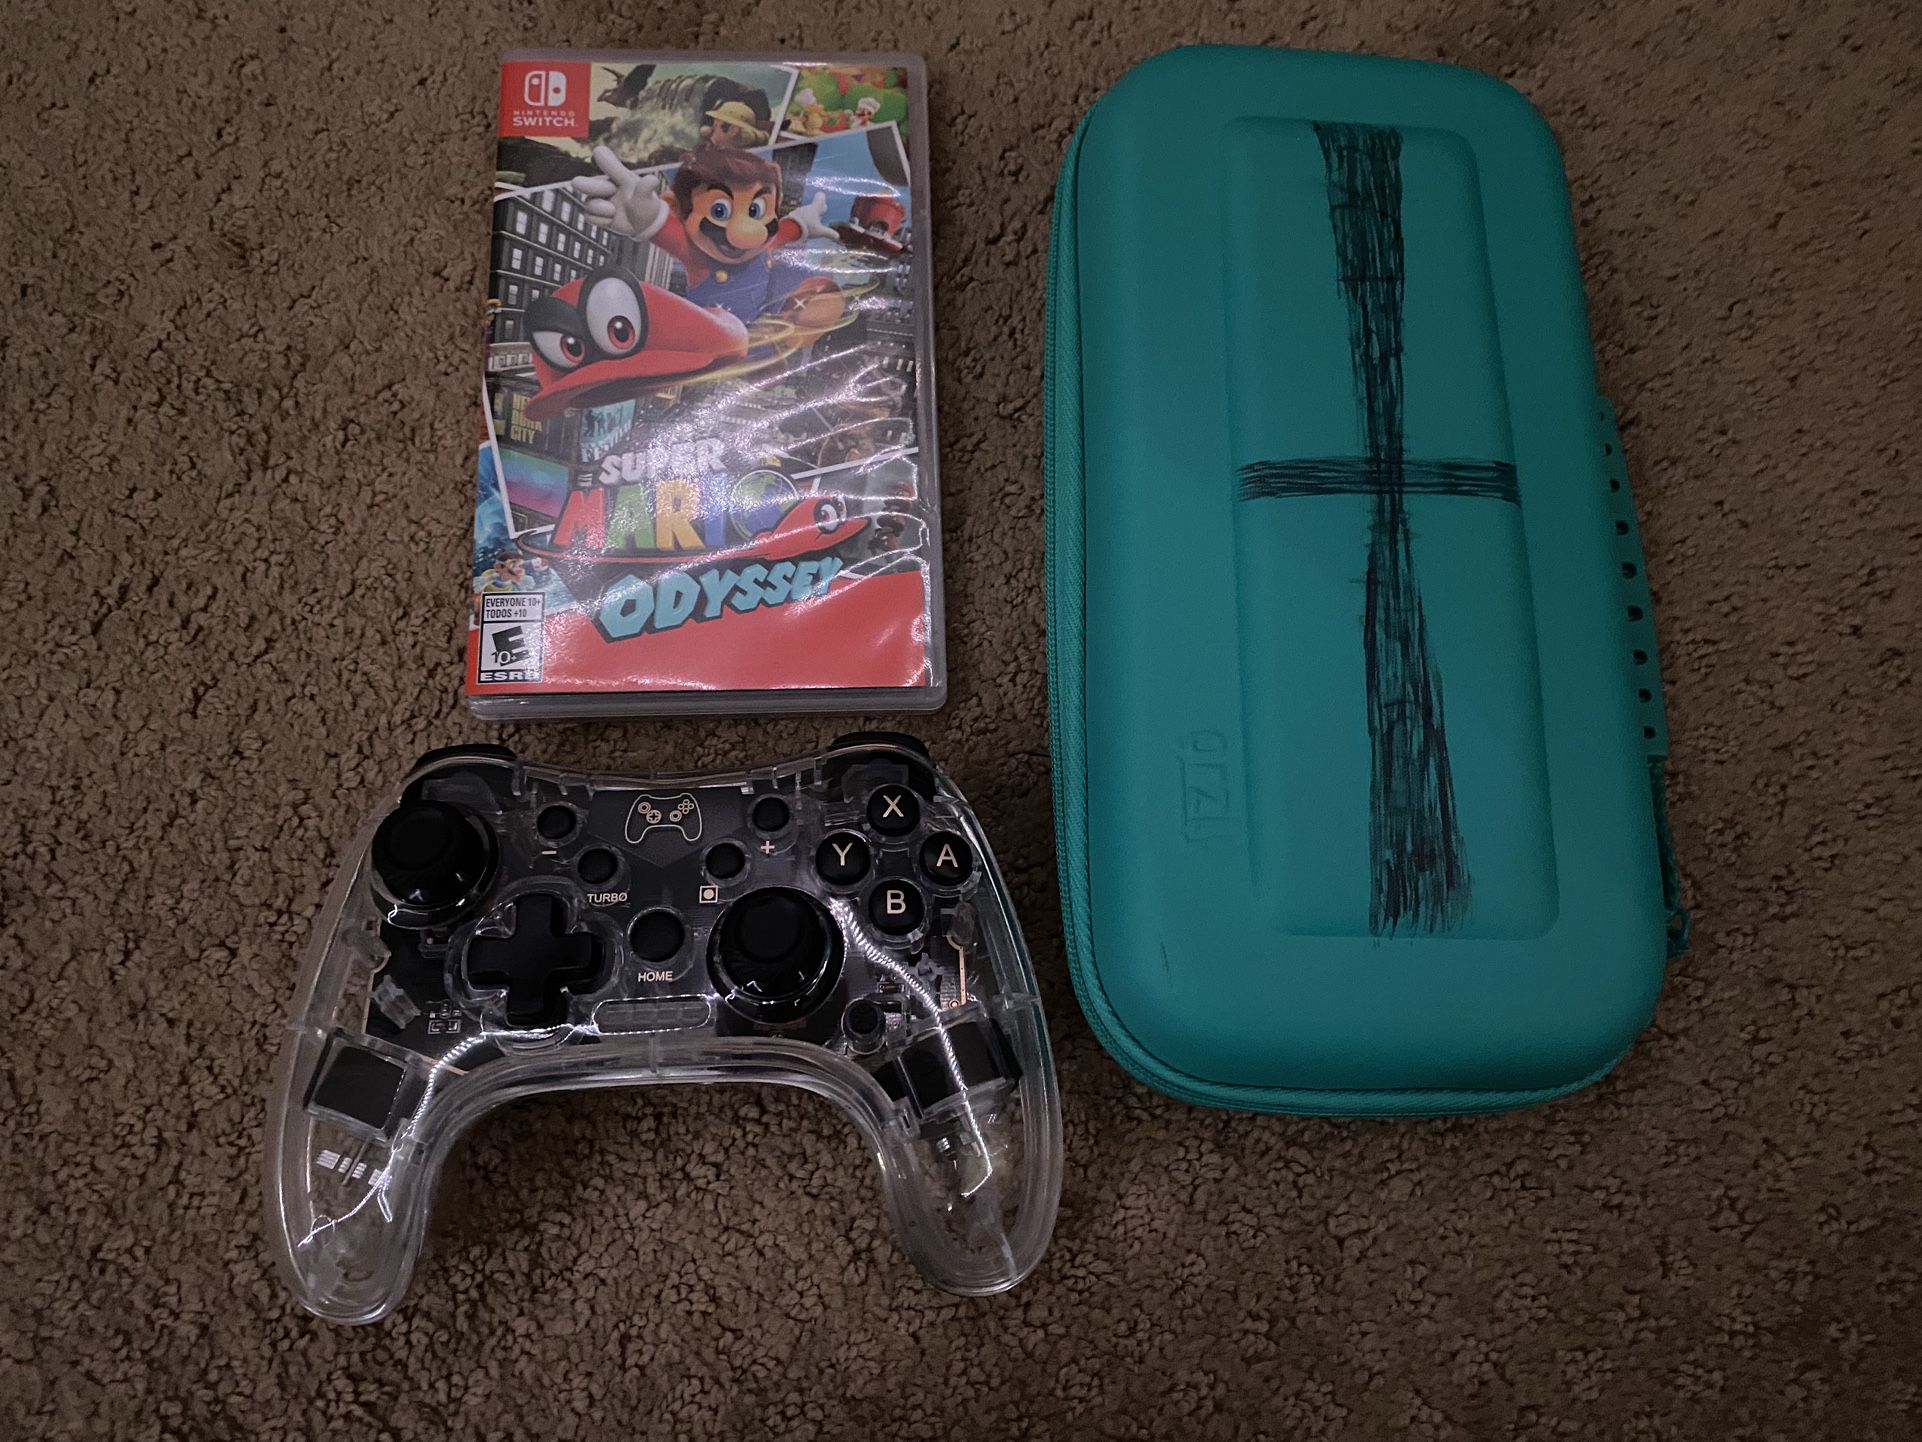 Cyan Nintendo Switch Lite - Case, Controller, and Super Mario Odyssey Included